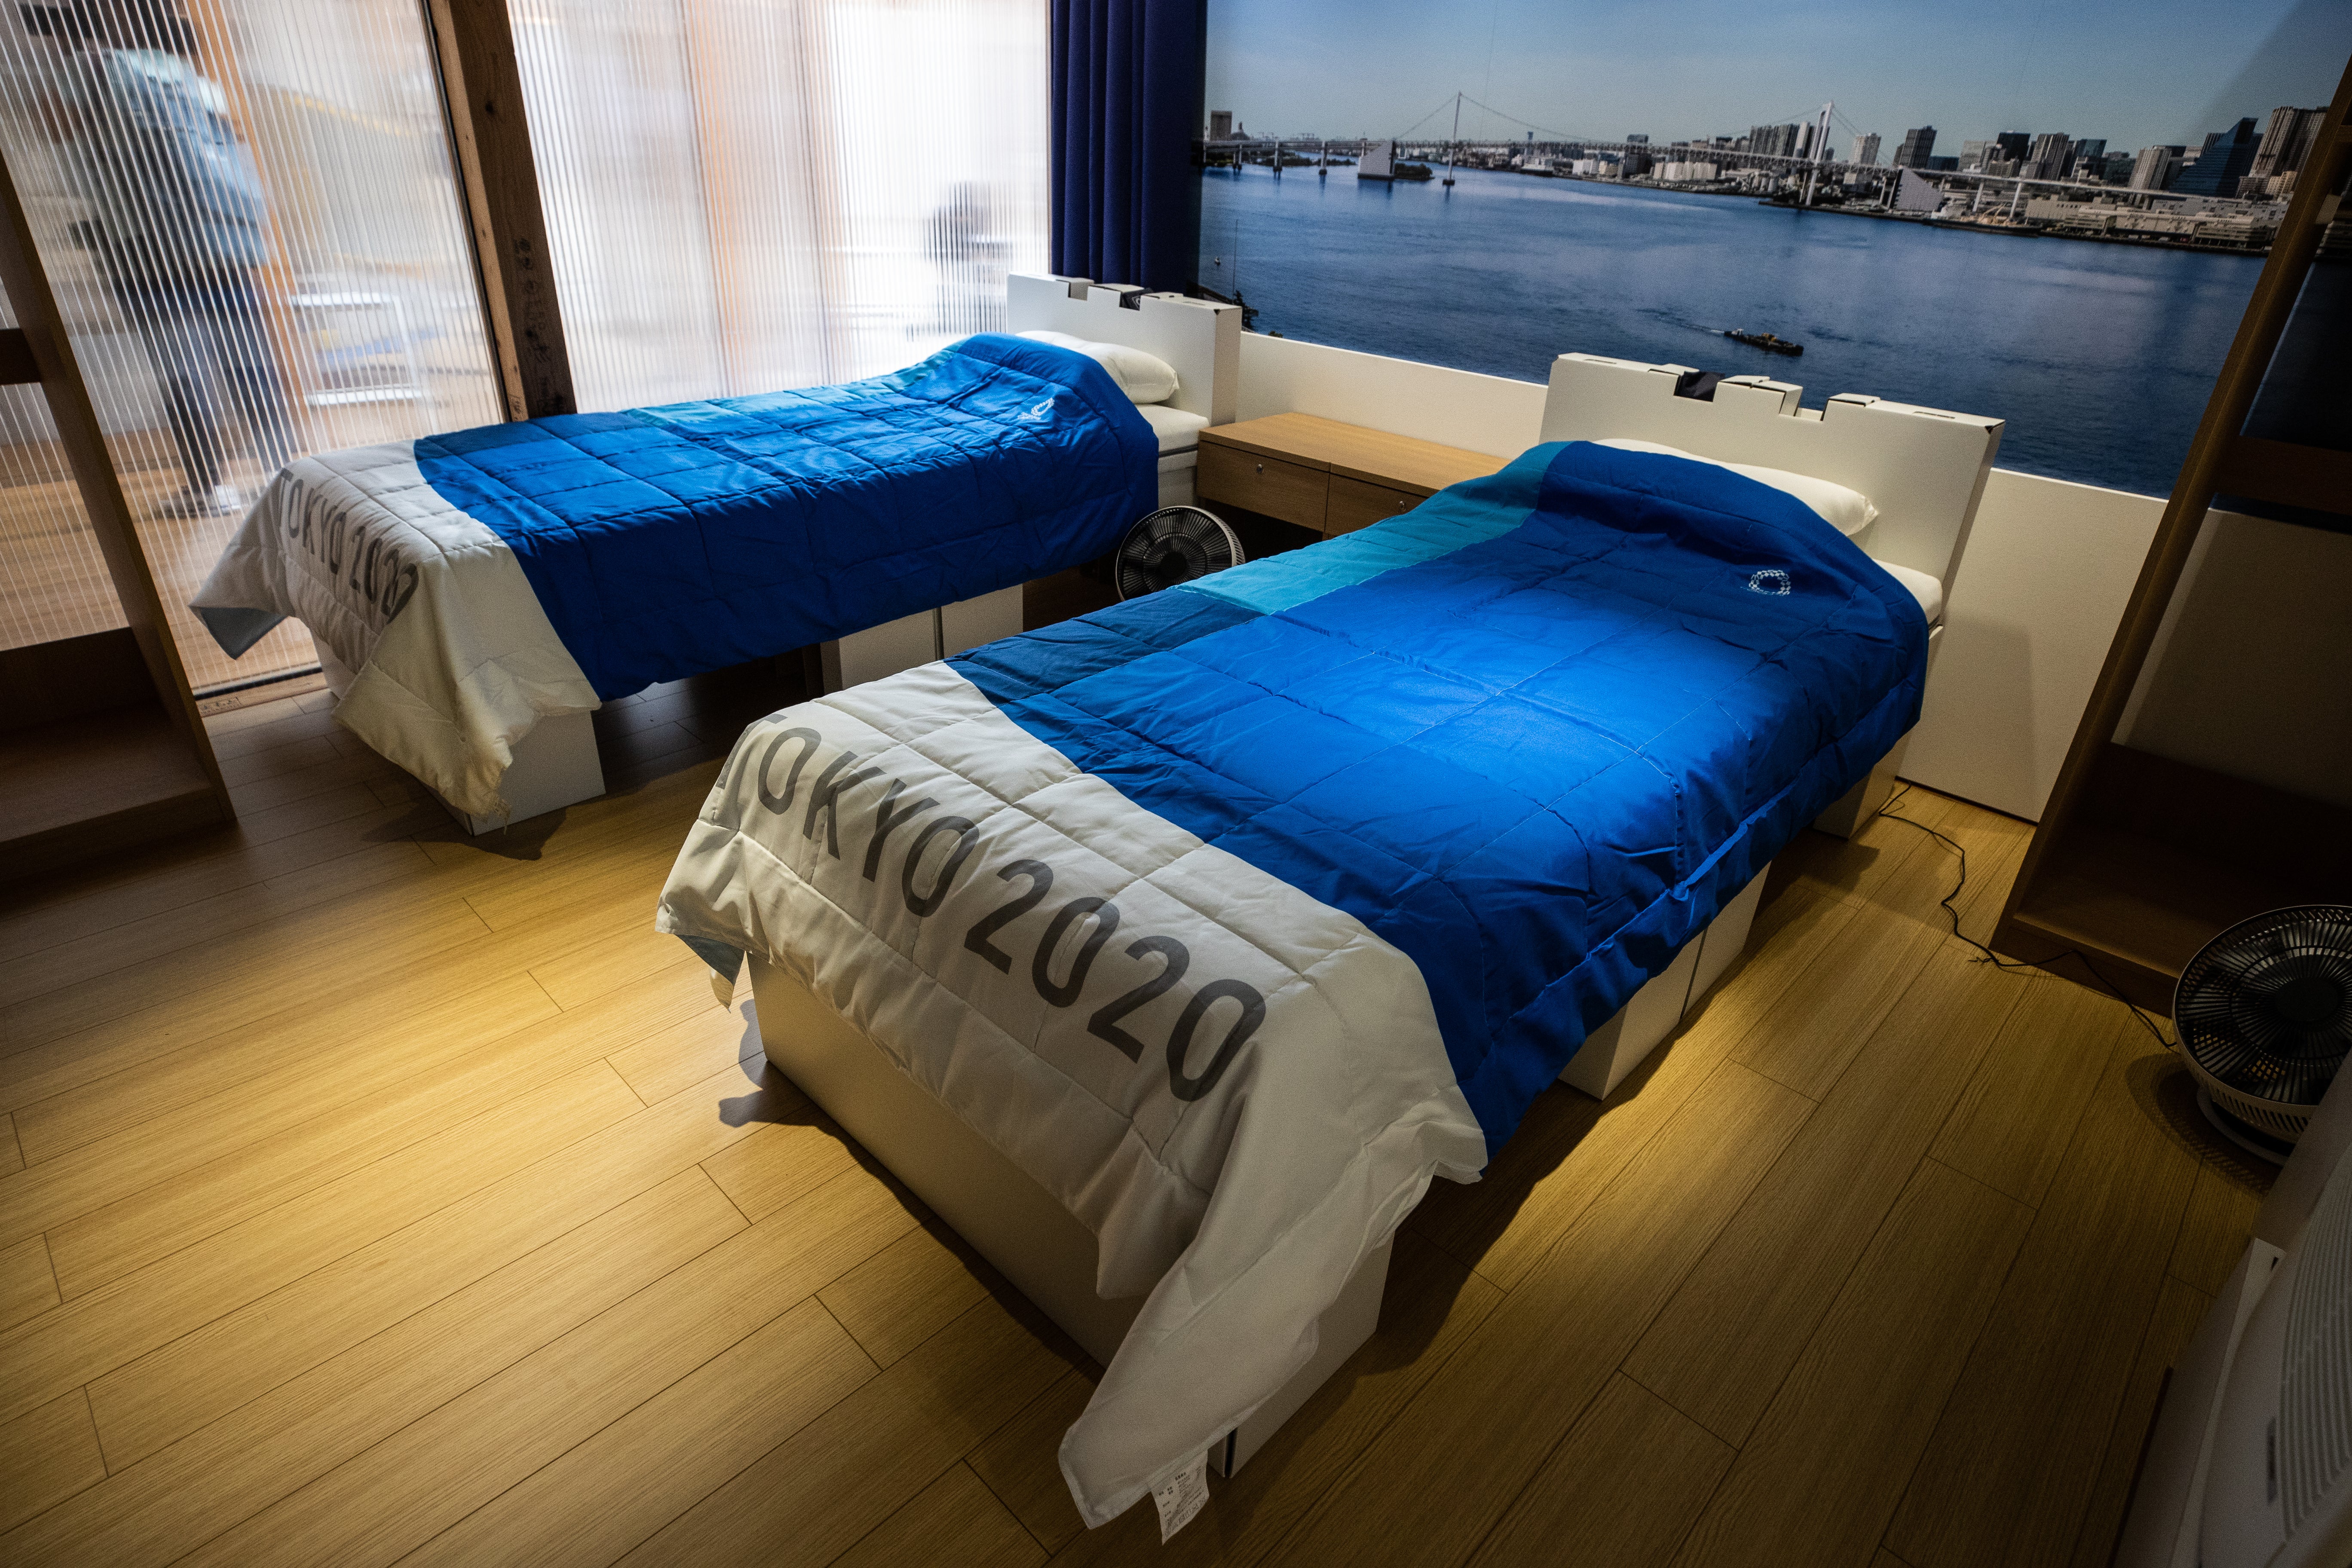 The Olympic village is complete with recyclable cardboard beds